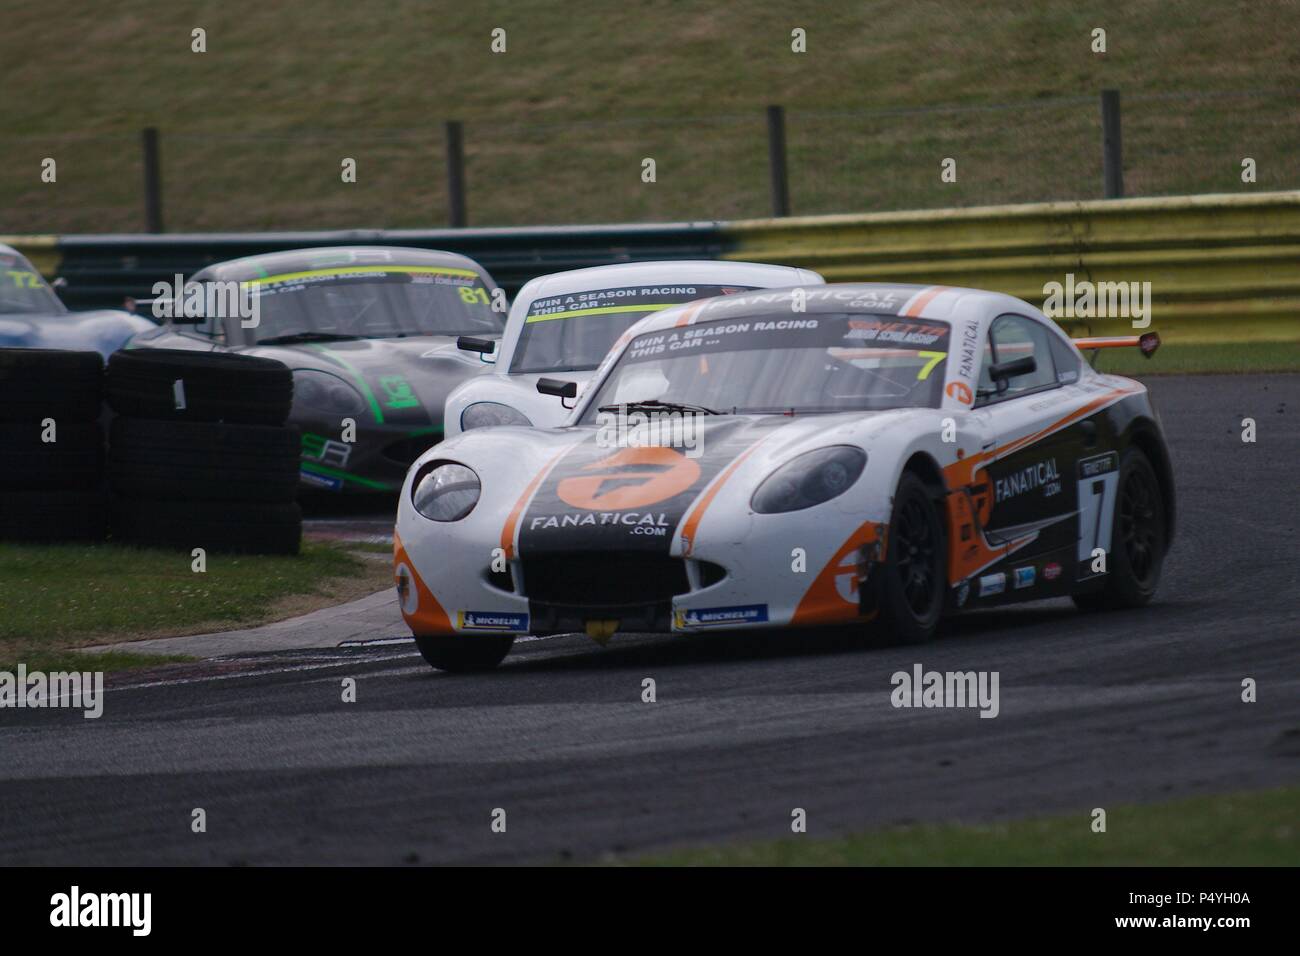 Dalton on Tees, England, 23 June 2018. Greg Johnson driving for Elite Motorsport, number 7, leading a group of cars in Round 11 of the Ginetta Junior Championship at Croft Circuit. Credit: Colin Edwards/Alamy Live News. Stock Photo